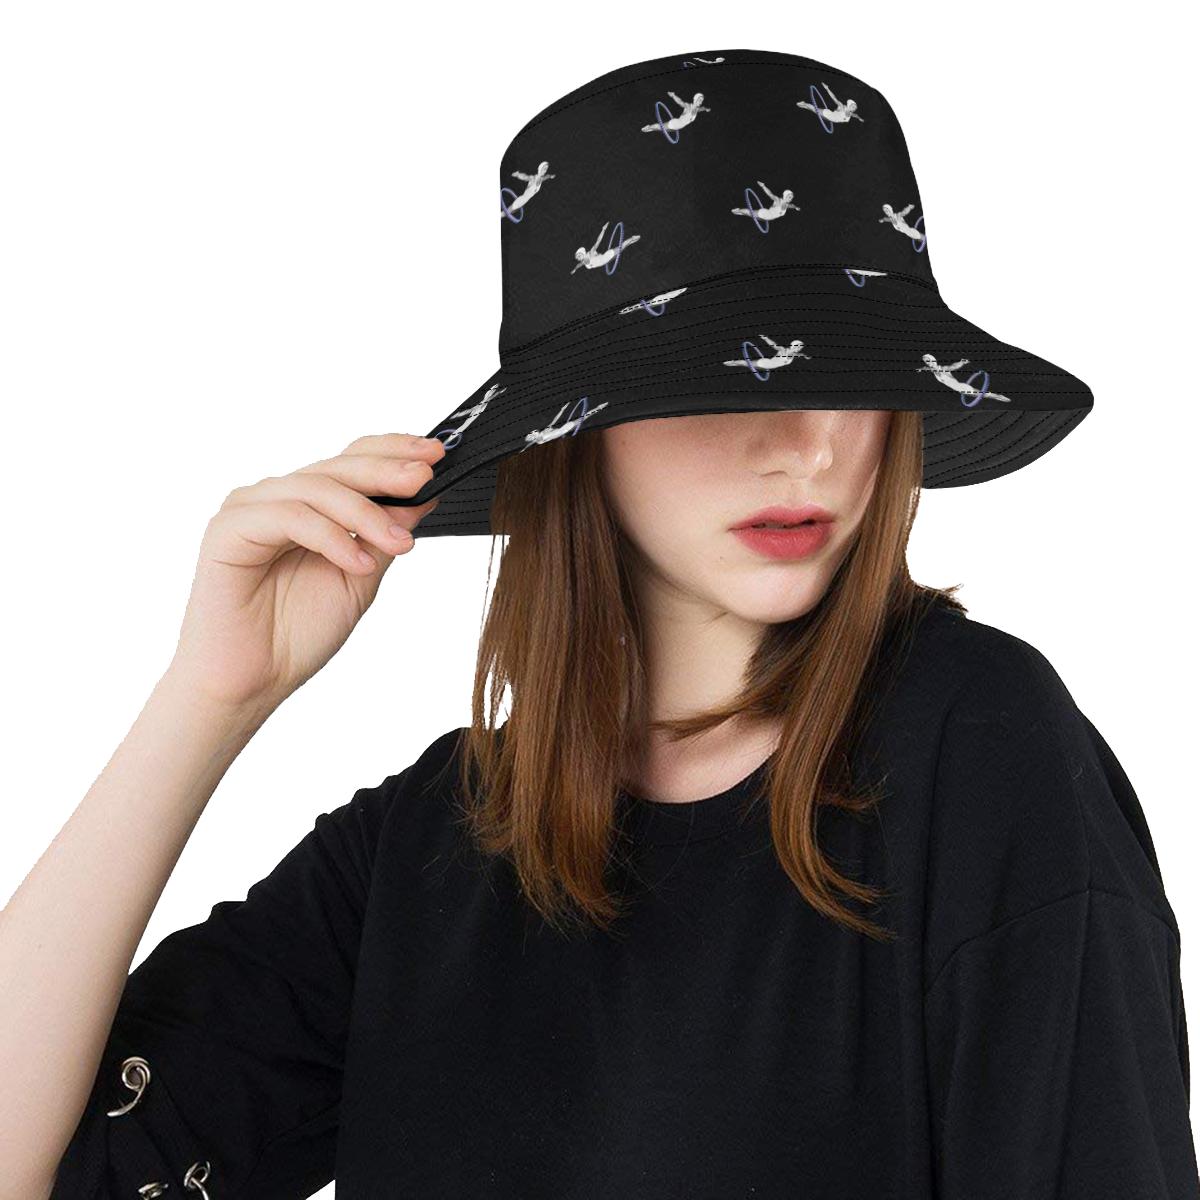 Hoopdivers All Over Print Bucket Hat